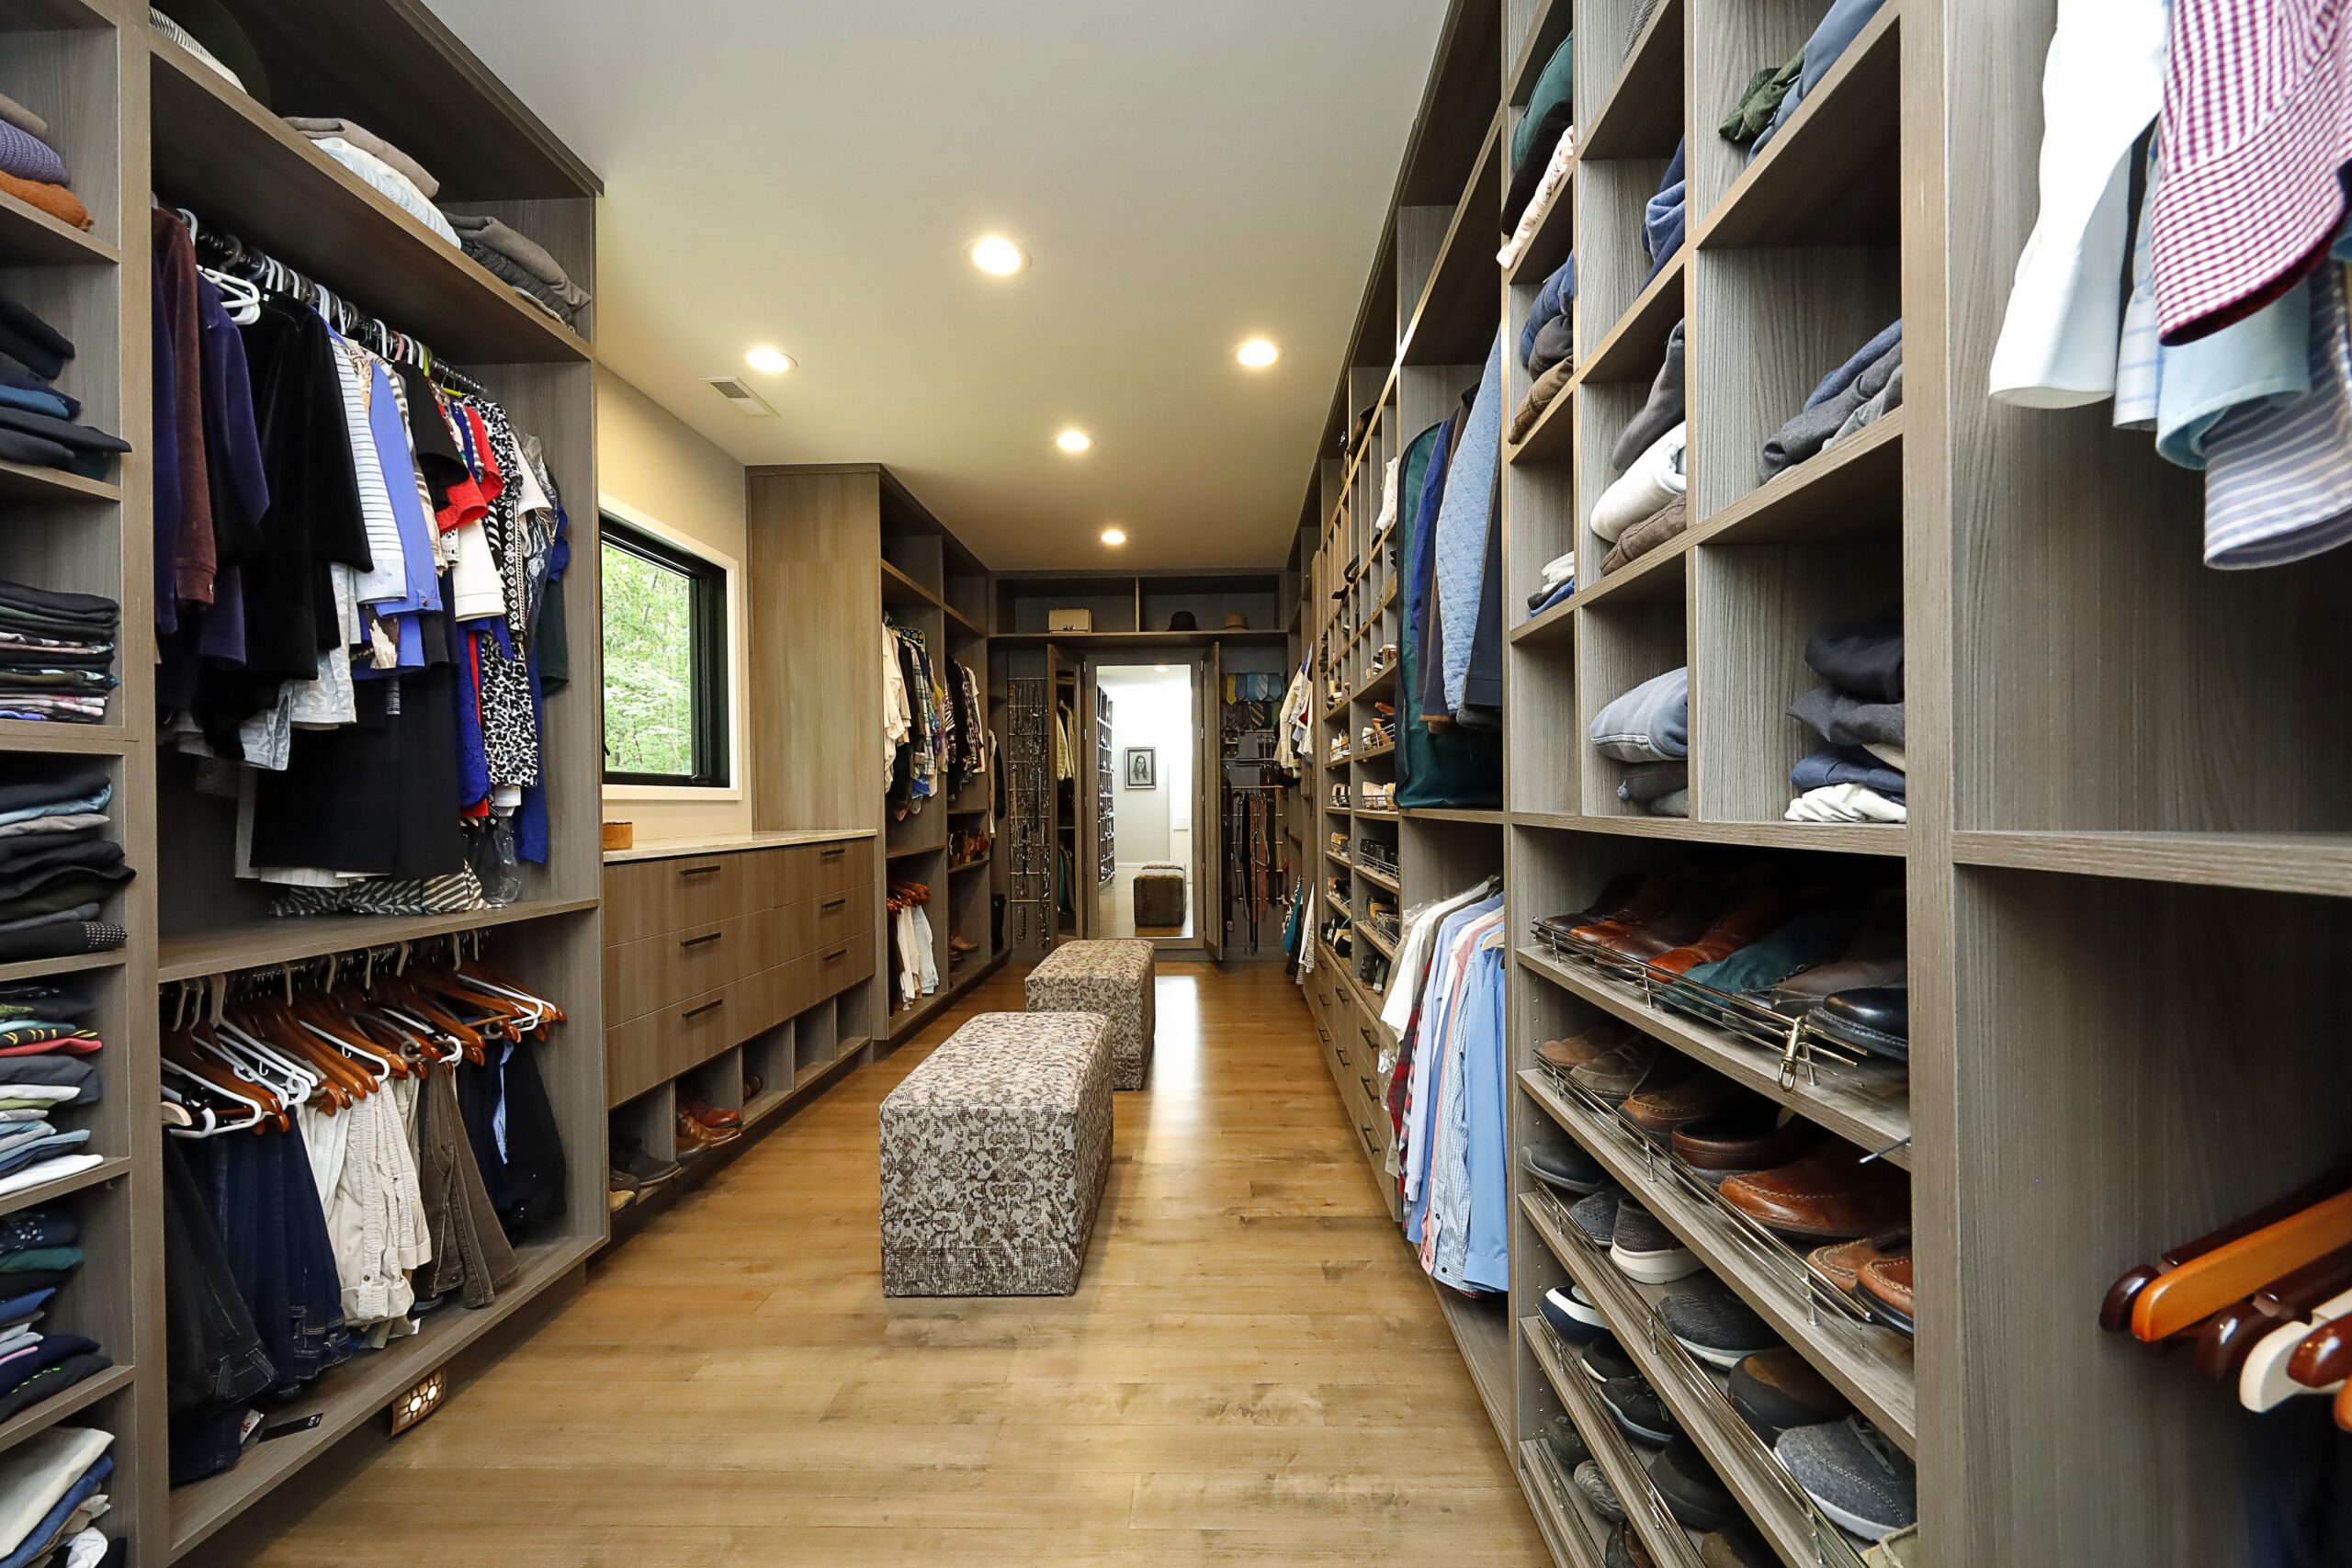 A large walk-in primary closet lined with built-in storage. A large central window illuminates a seating area.